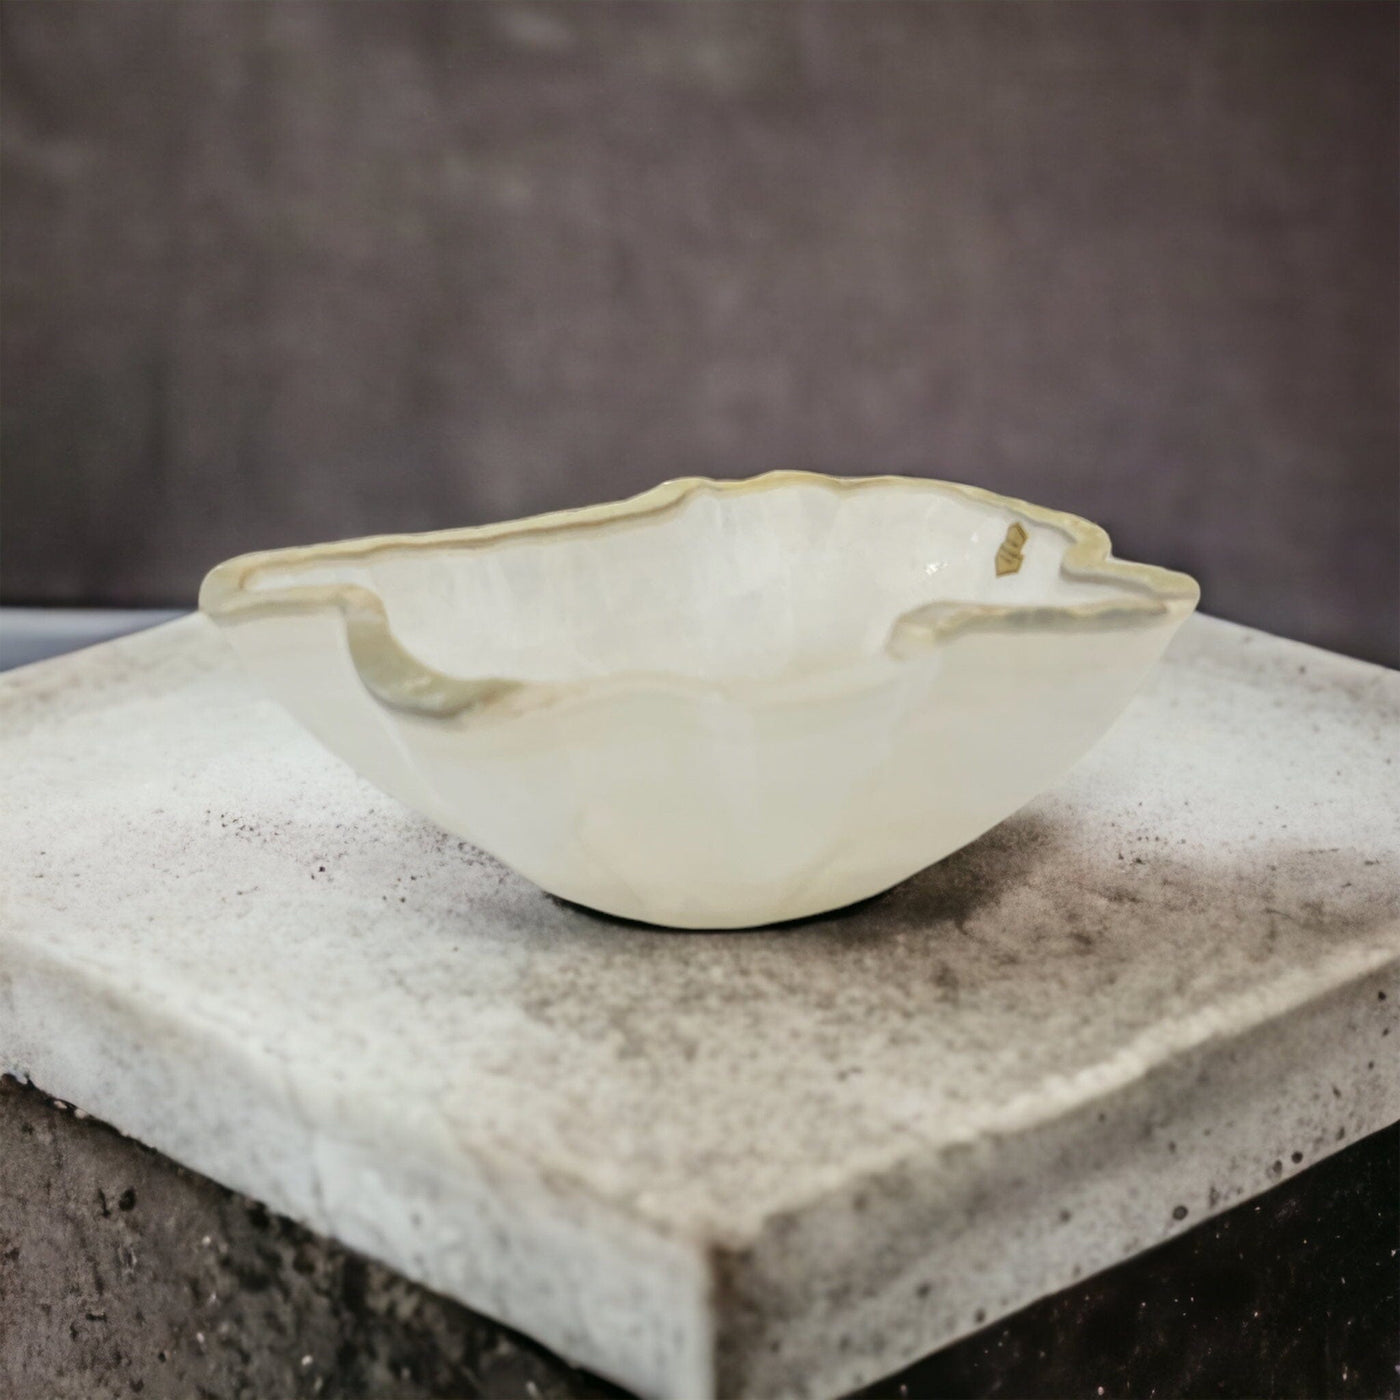 Light colored Mexican onyx bowl on a gray background.